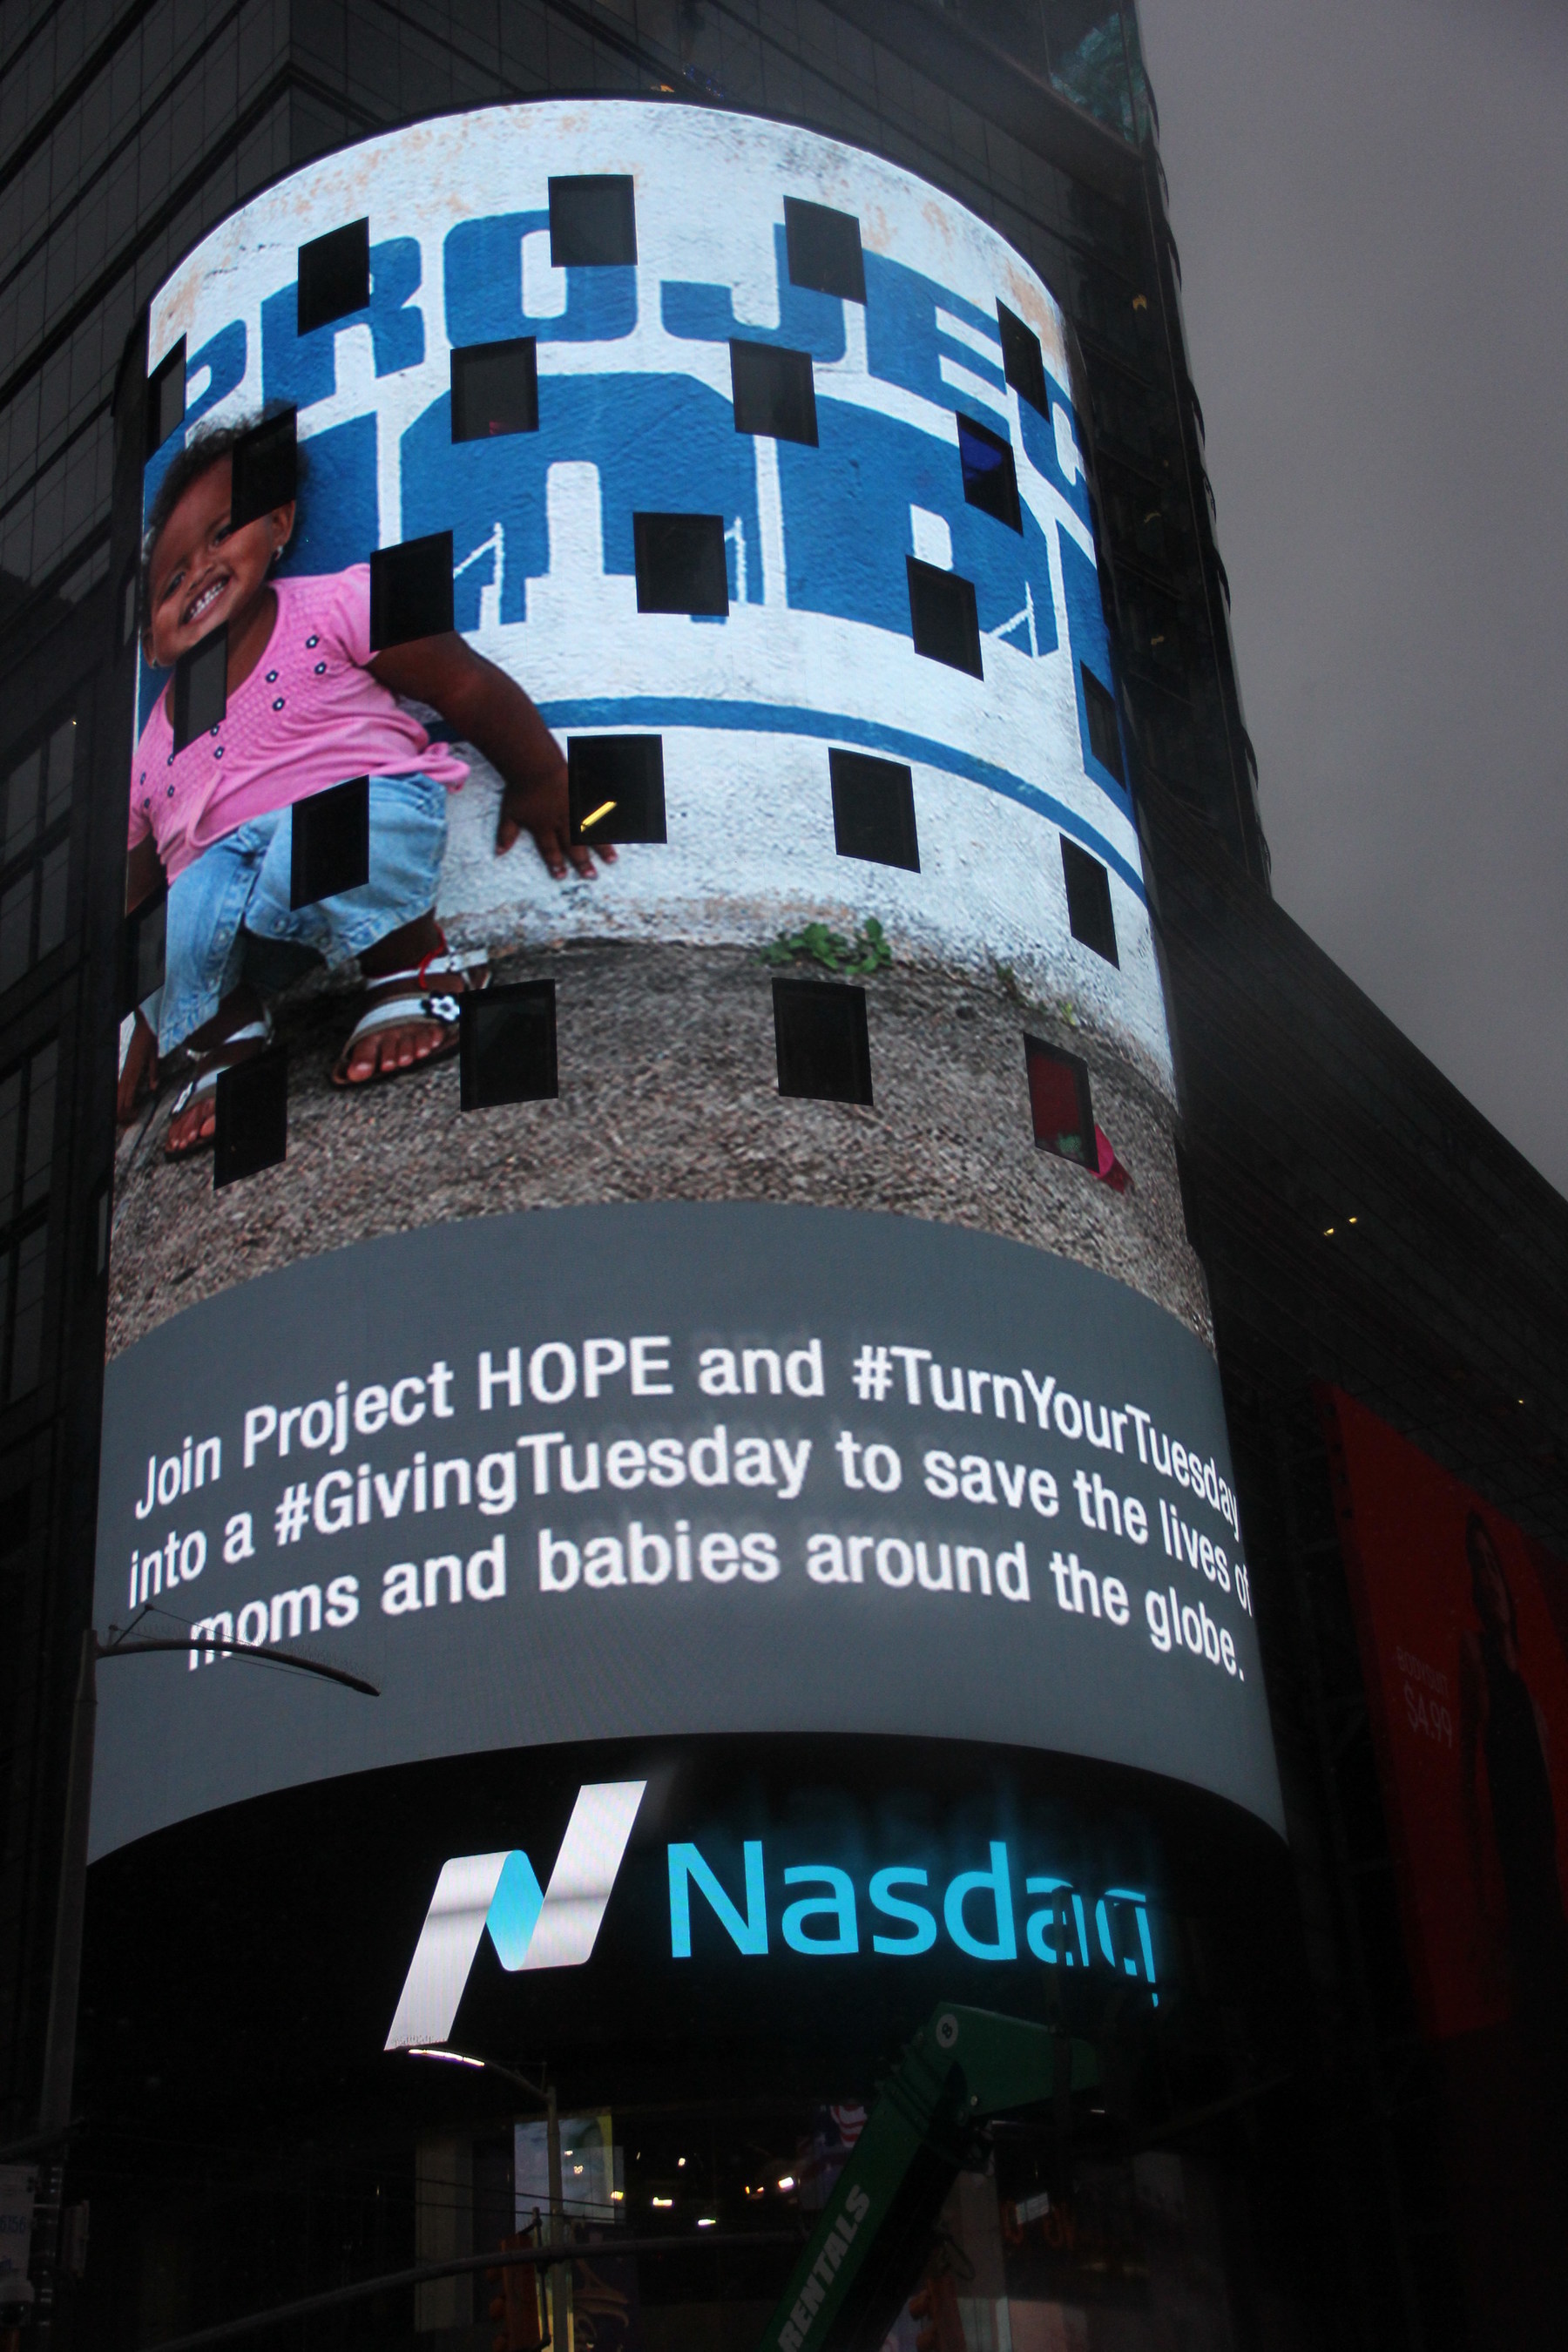 Blackbaud is takes over the Nasdaq tower at Times Square to promote what its customers are doing for #GivingTuesday. Your dollars help Project HOPE drive humanitarian assistance around the world.